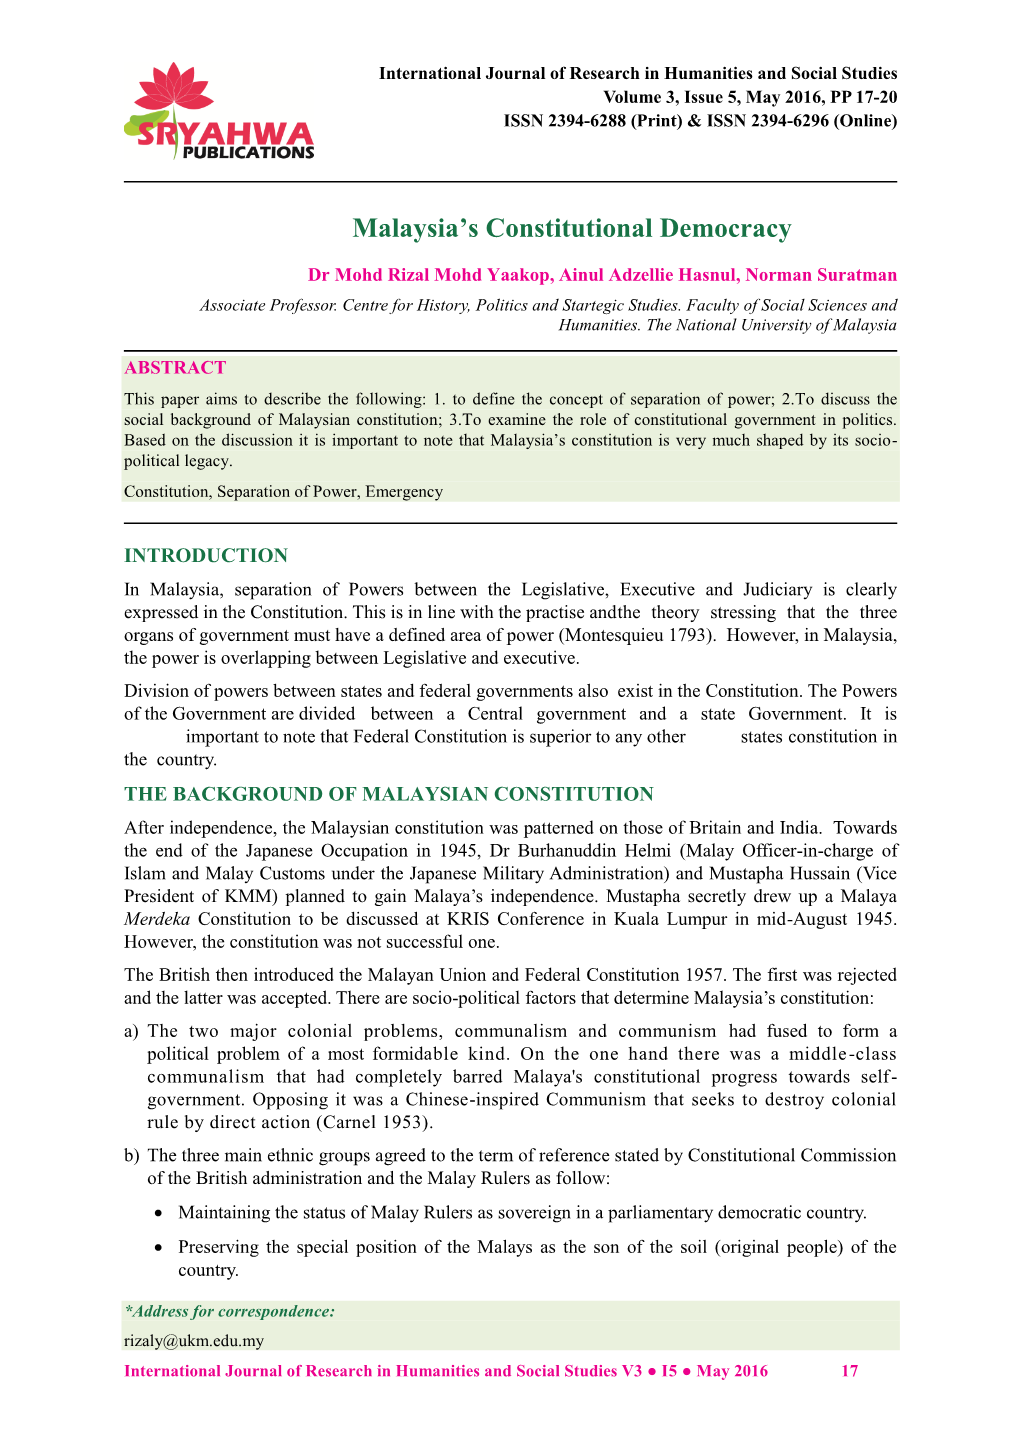 Malaysia's Constitutional Democracy